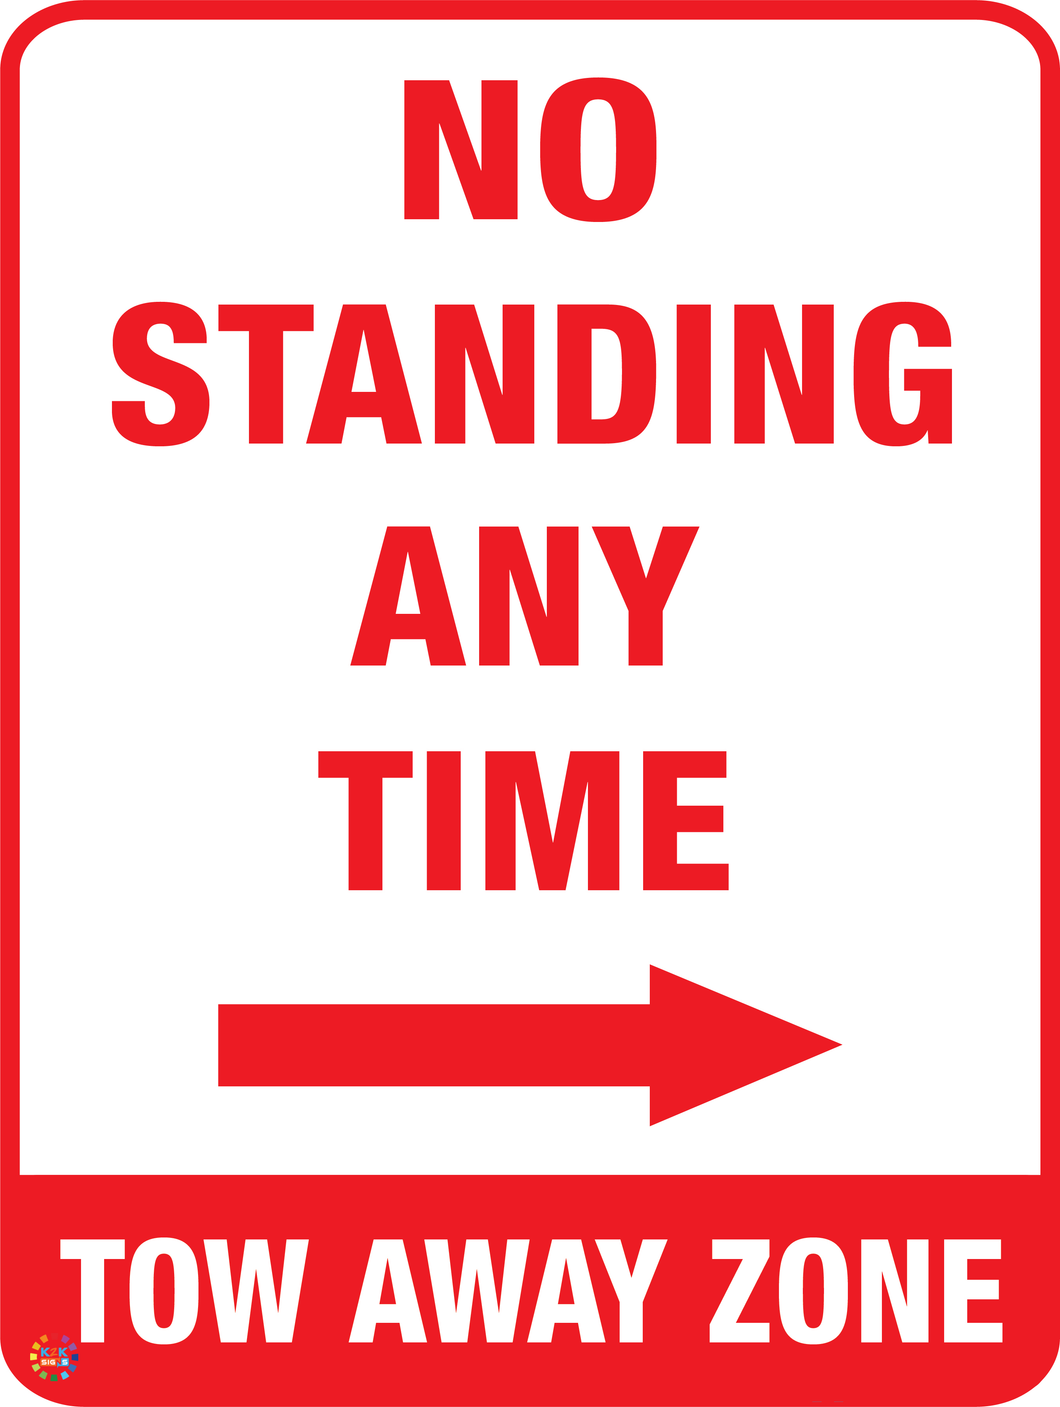 No Standing Any Time Two Away Zone (Right Arrow) Sign